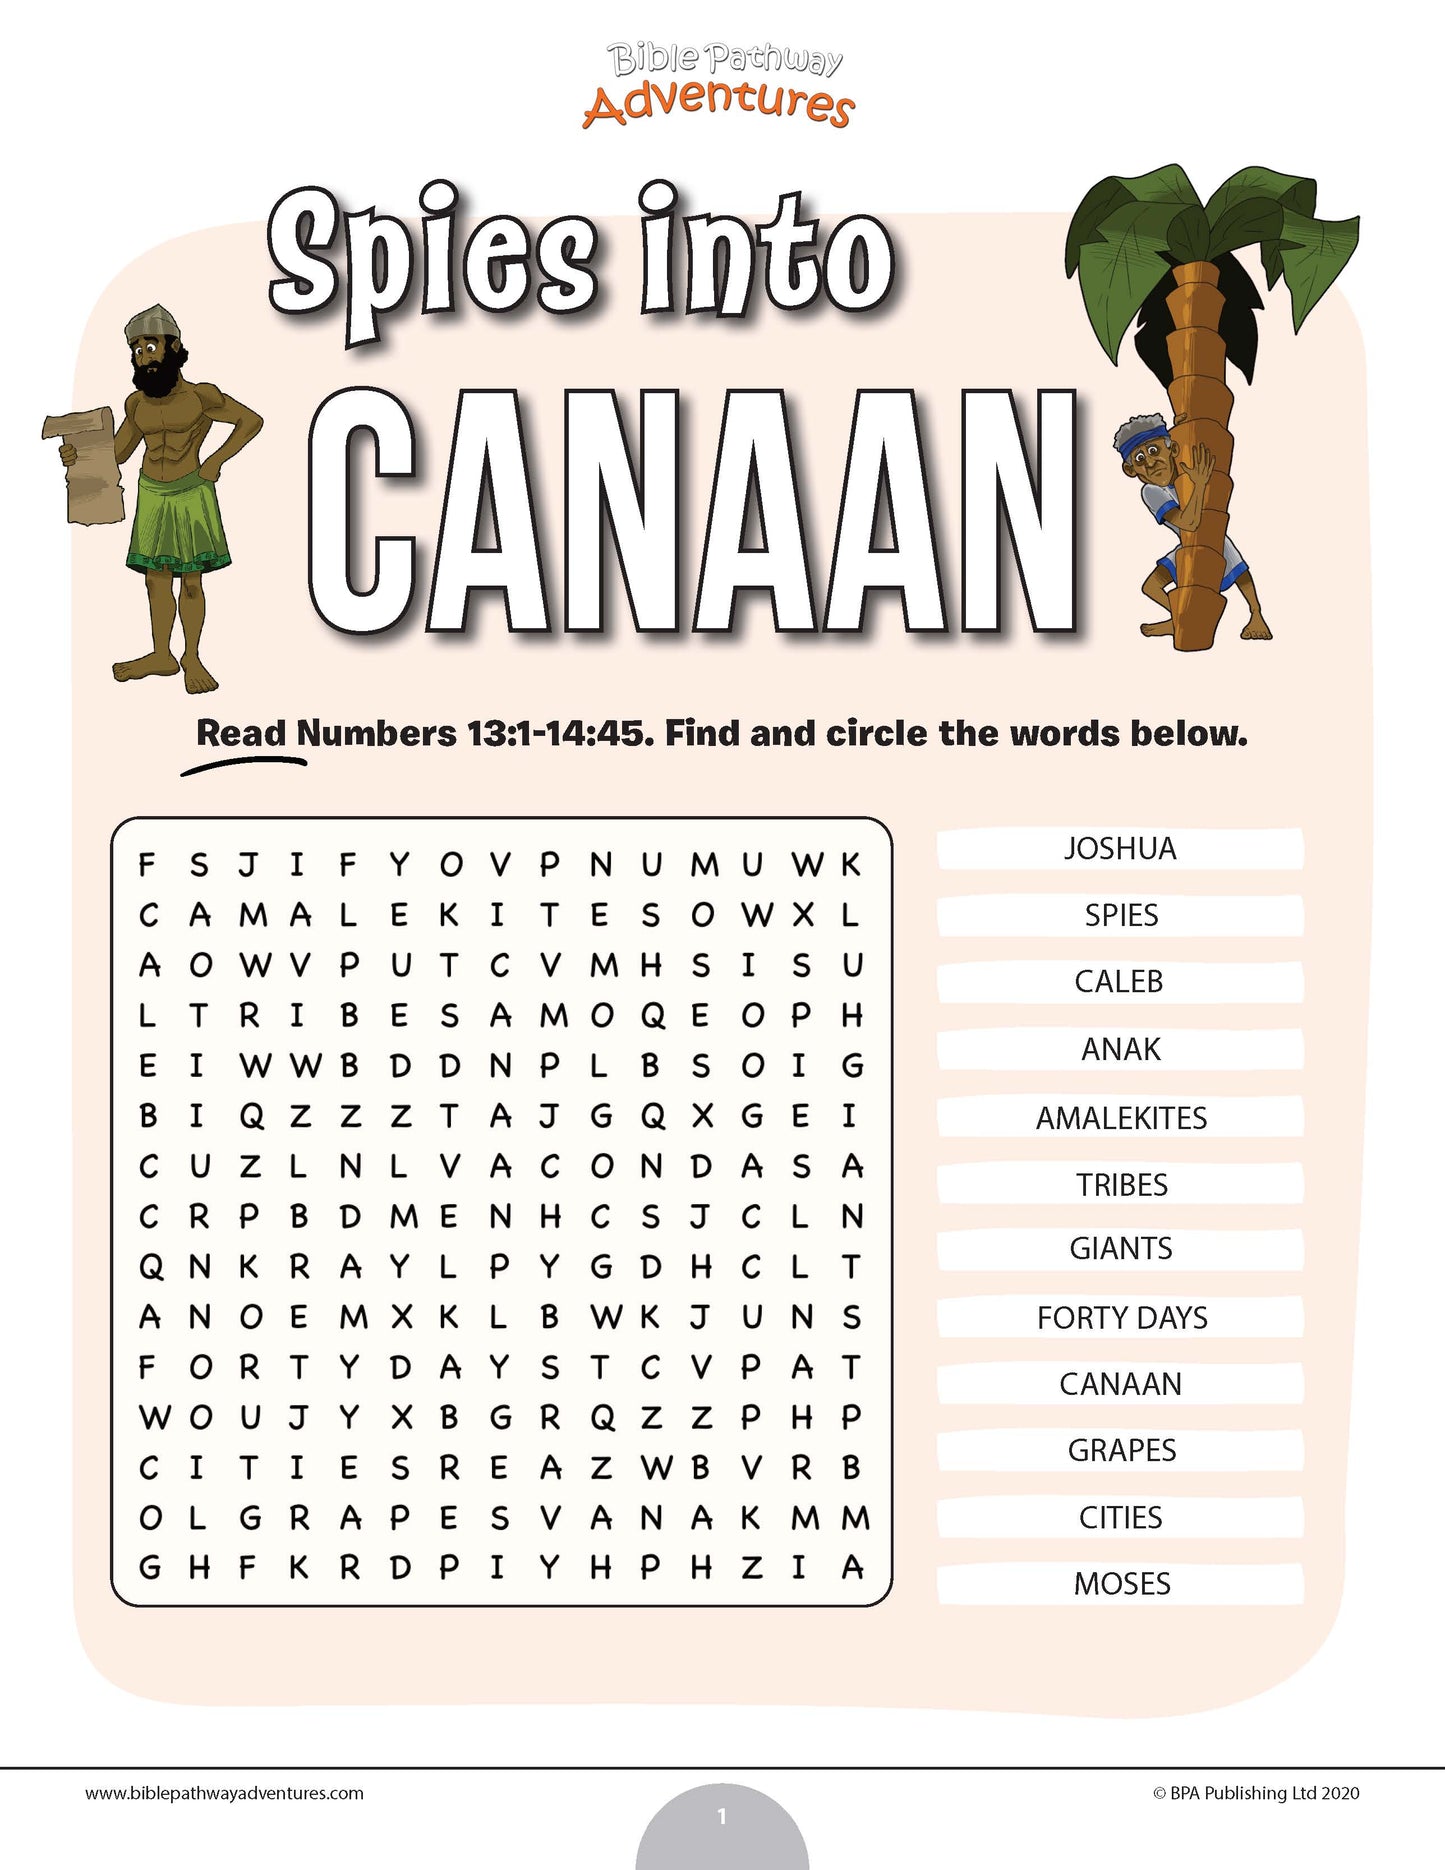 Spies into Canaan word search